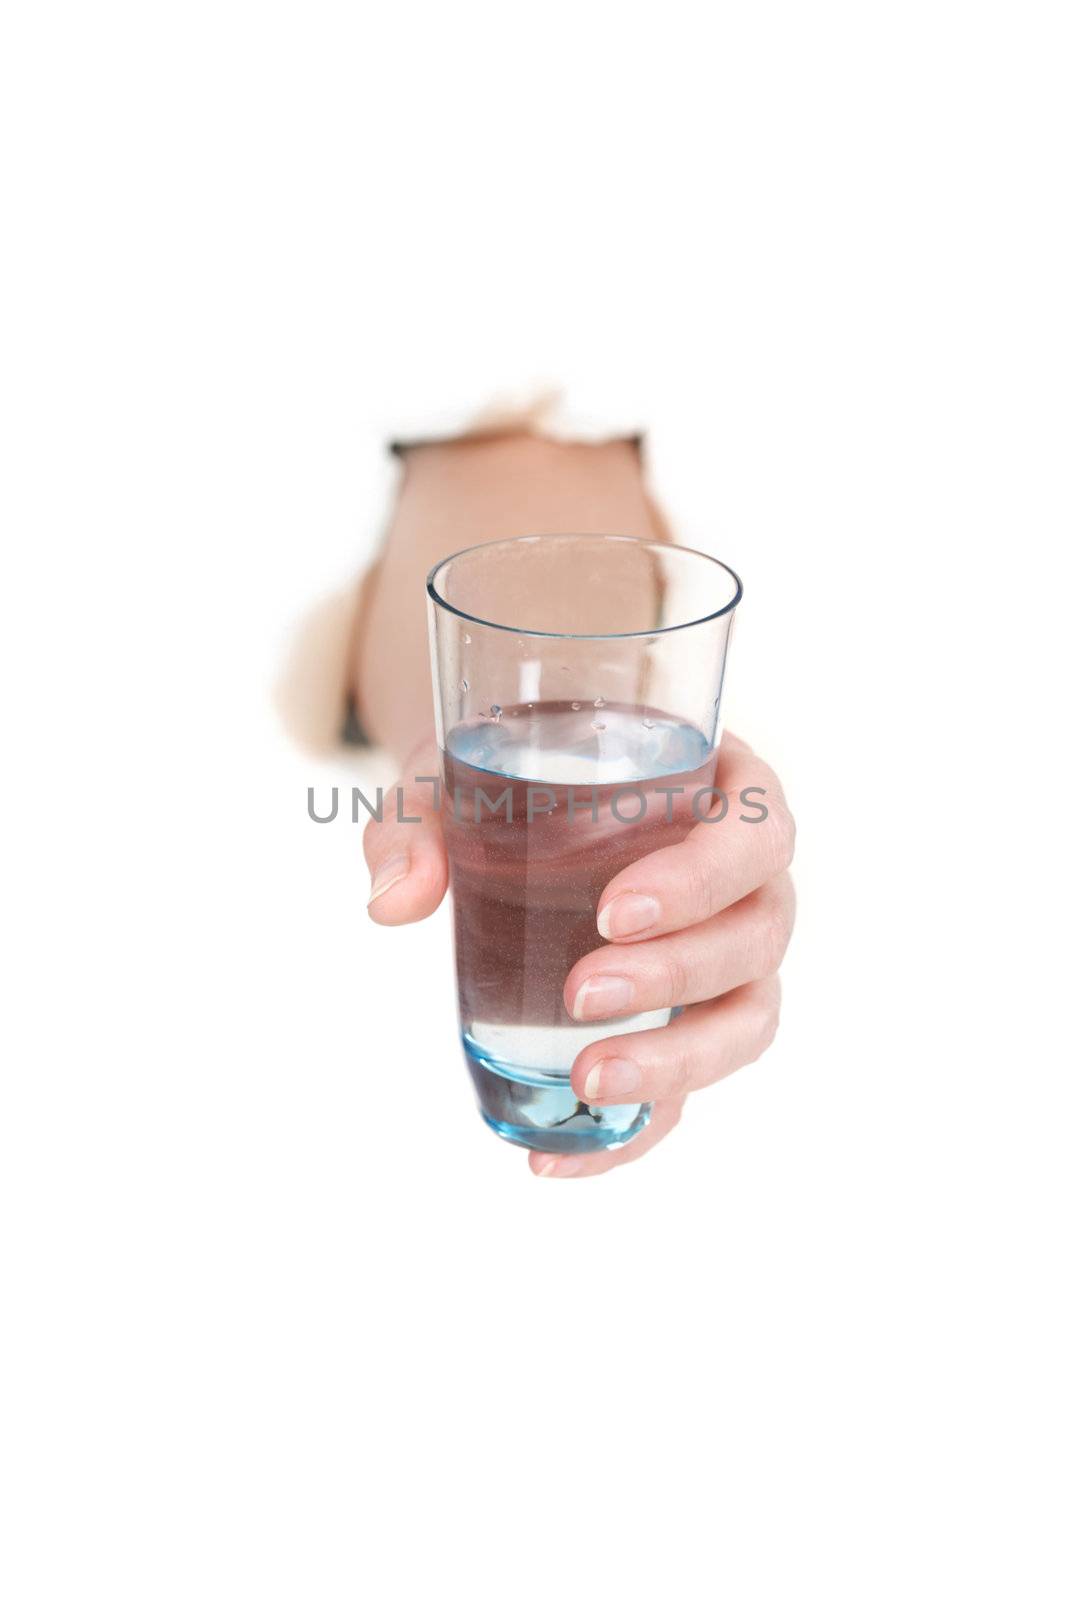 The hand and glass on a white background. Paper